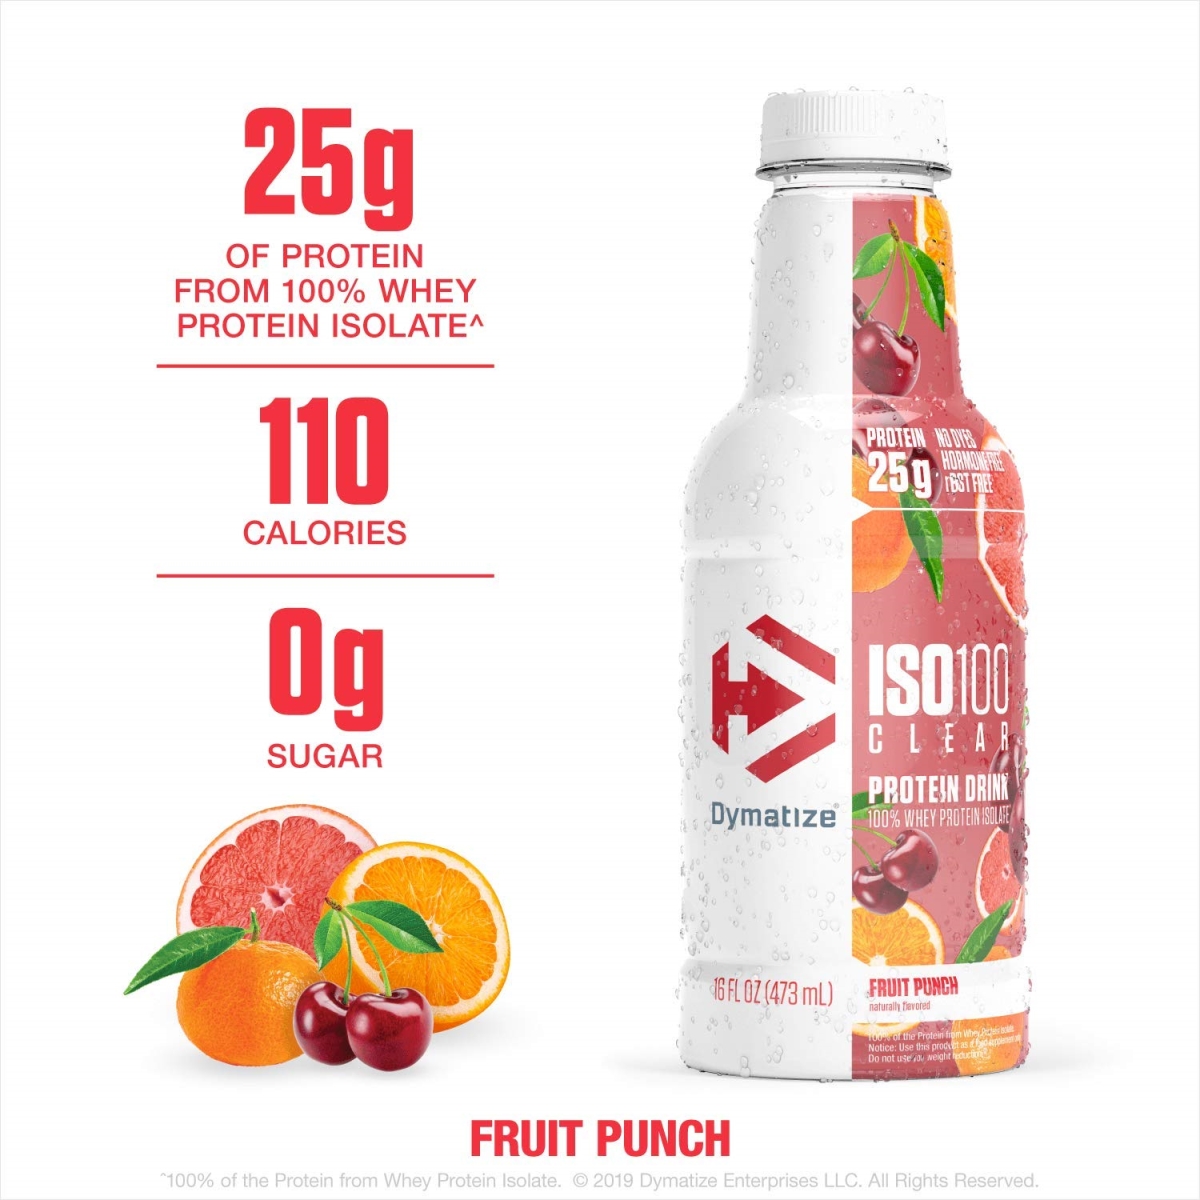 2060803 Iso-100 Clear Whey Protein Isolate Drinks, Fruit Punch - 16 Oz - 12 Per Case